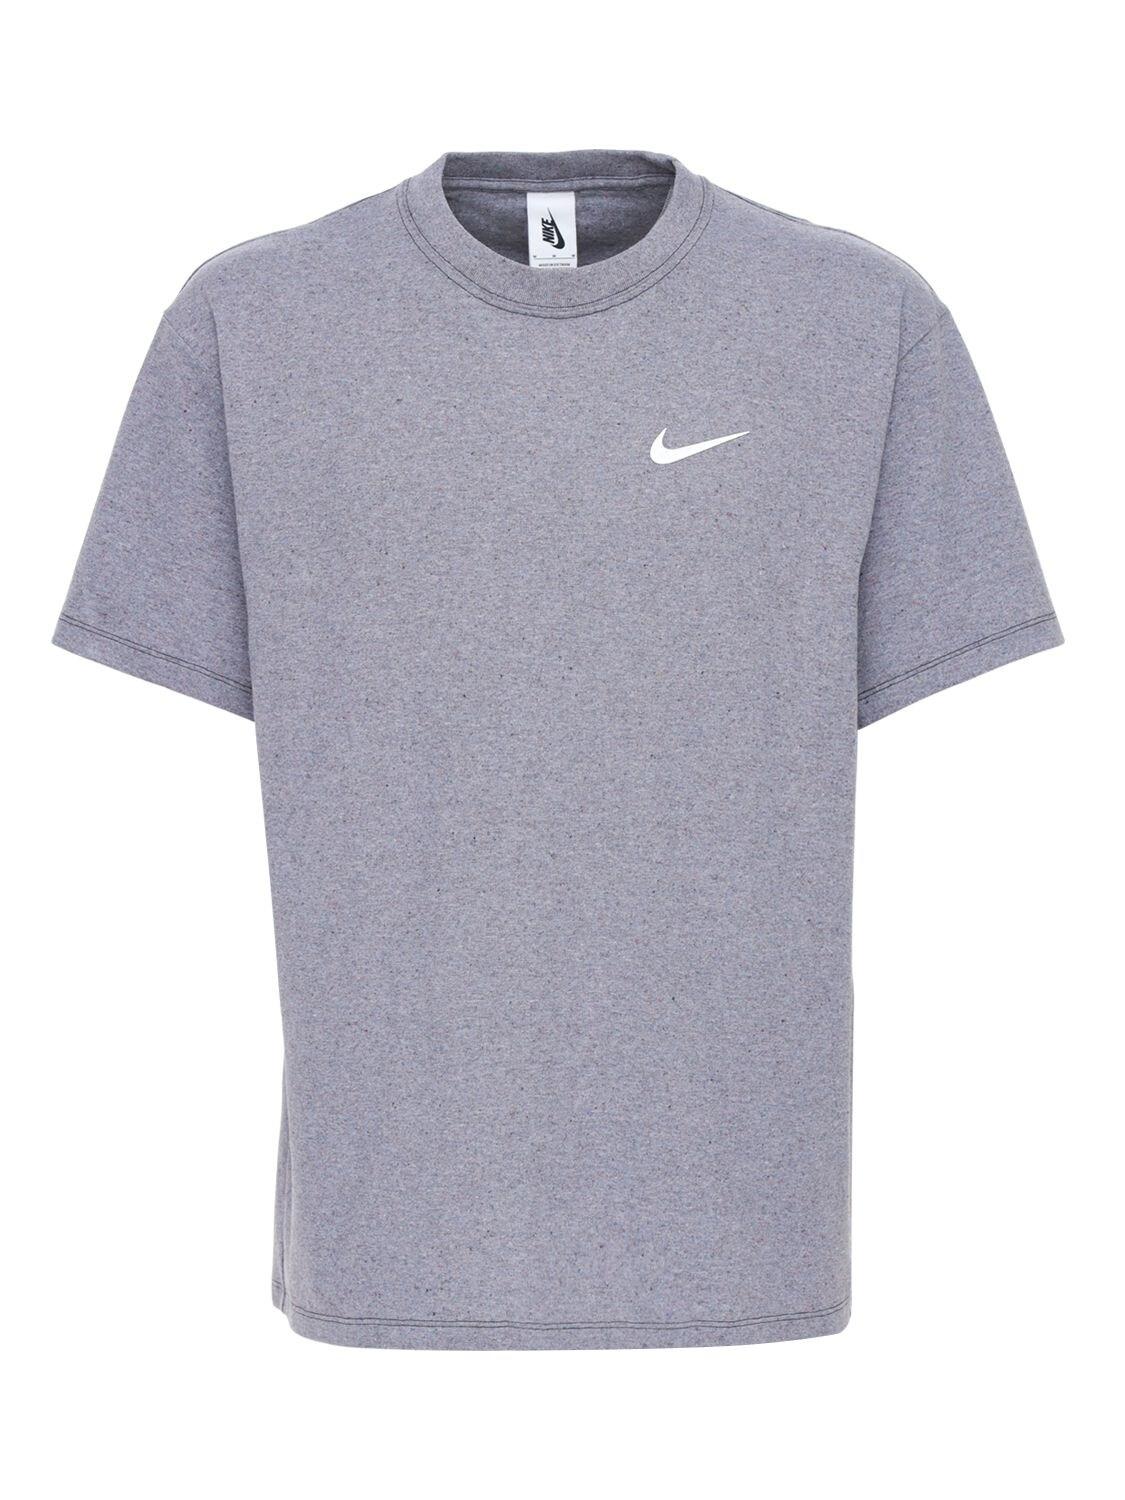 Nike Space Hippie T-shirt for Men - Lyst